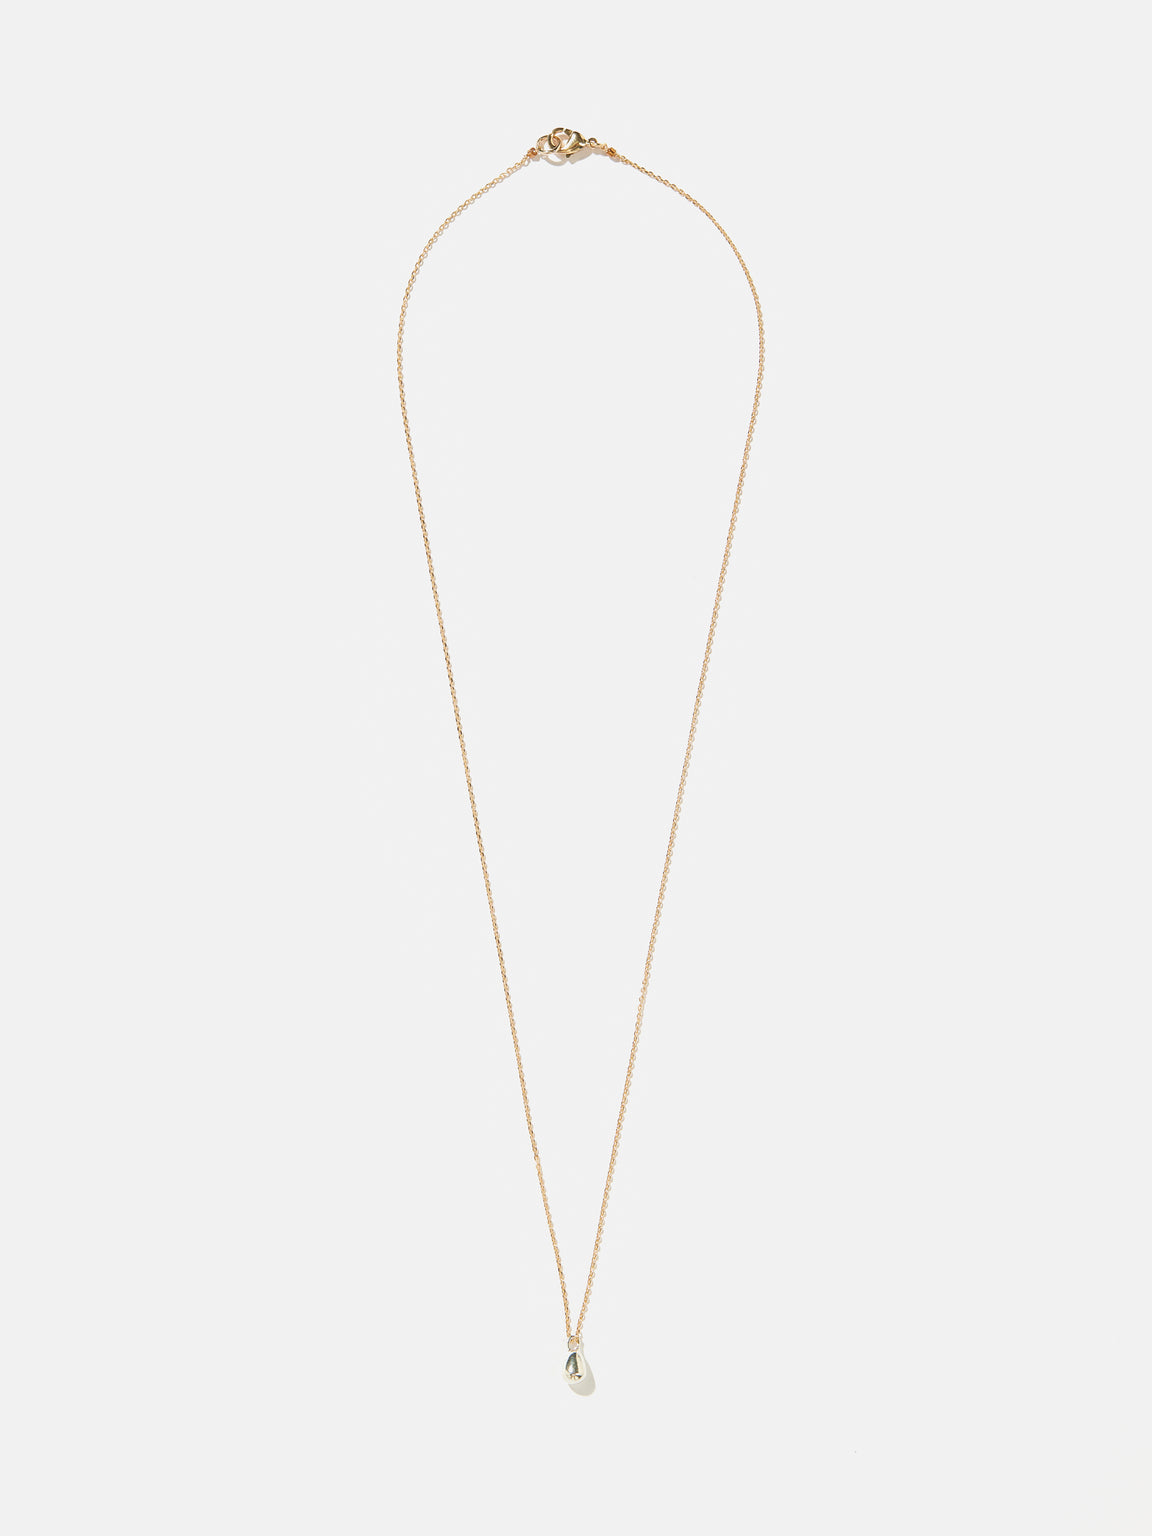 HELENA ROHNER | TINY SILVER DROP PENDANT NECKLACE SILVER